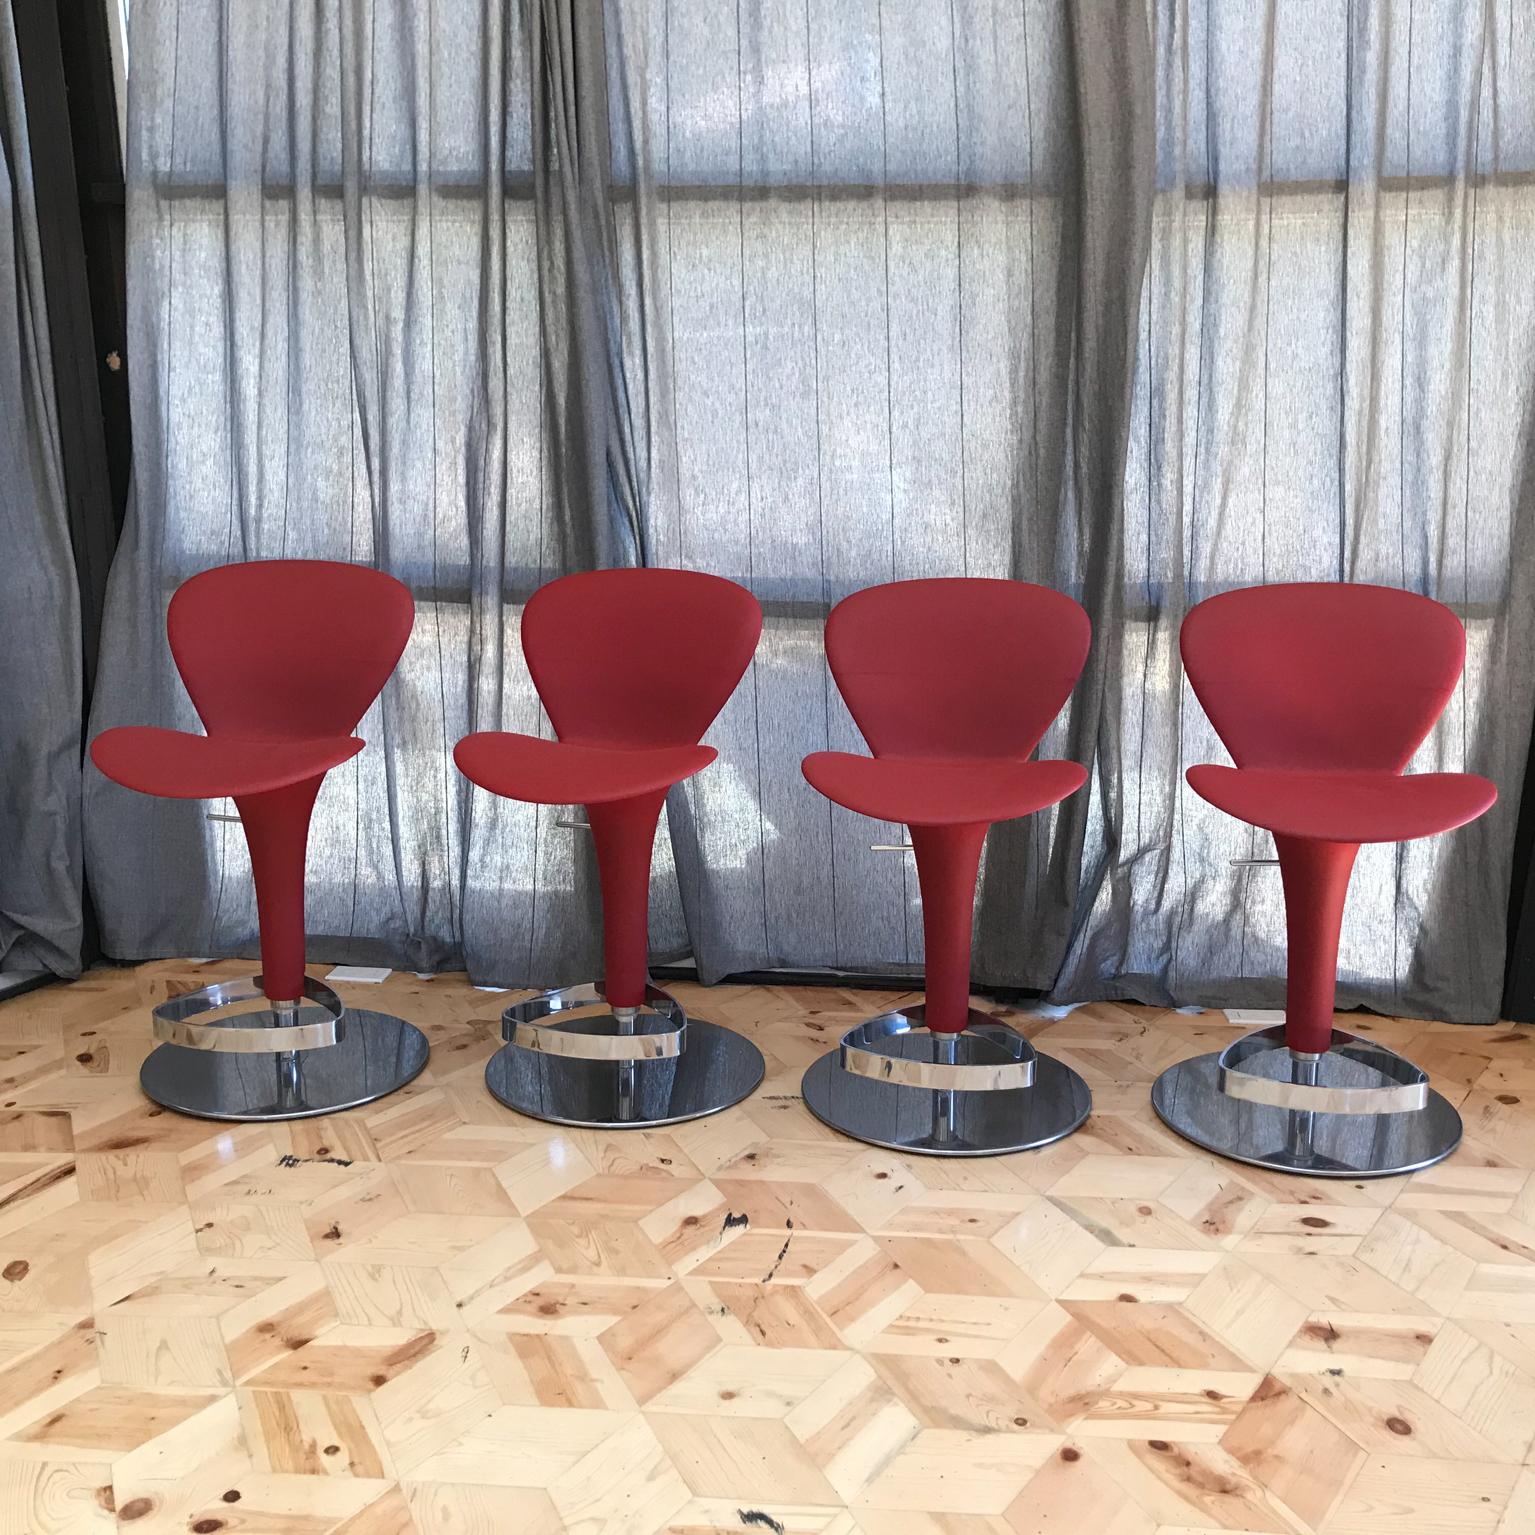 Counter Bar Stools
Modern Italian Four Red bar stools, Oslo Petal Freeform by Tonin Casa Italian Furniture Factory. Made in Italy.
Swivel stool, chrome metal base, freeform tech seat, height adjustable.
Seat height adjusts from 21 up to 29 inches
32